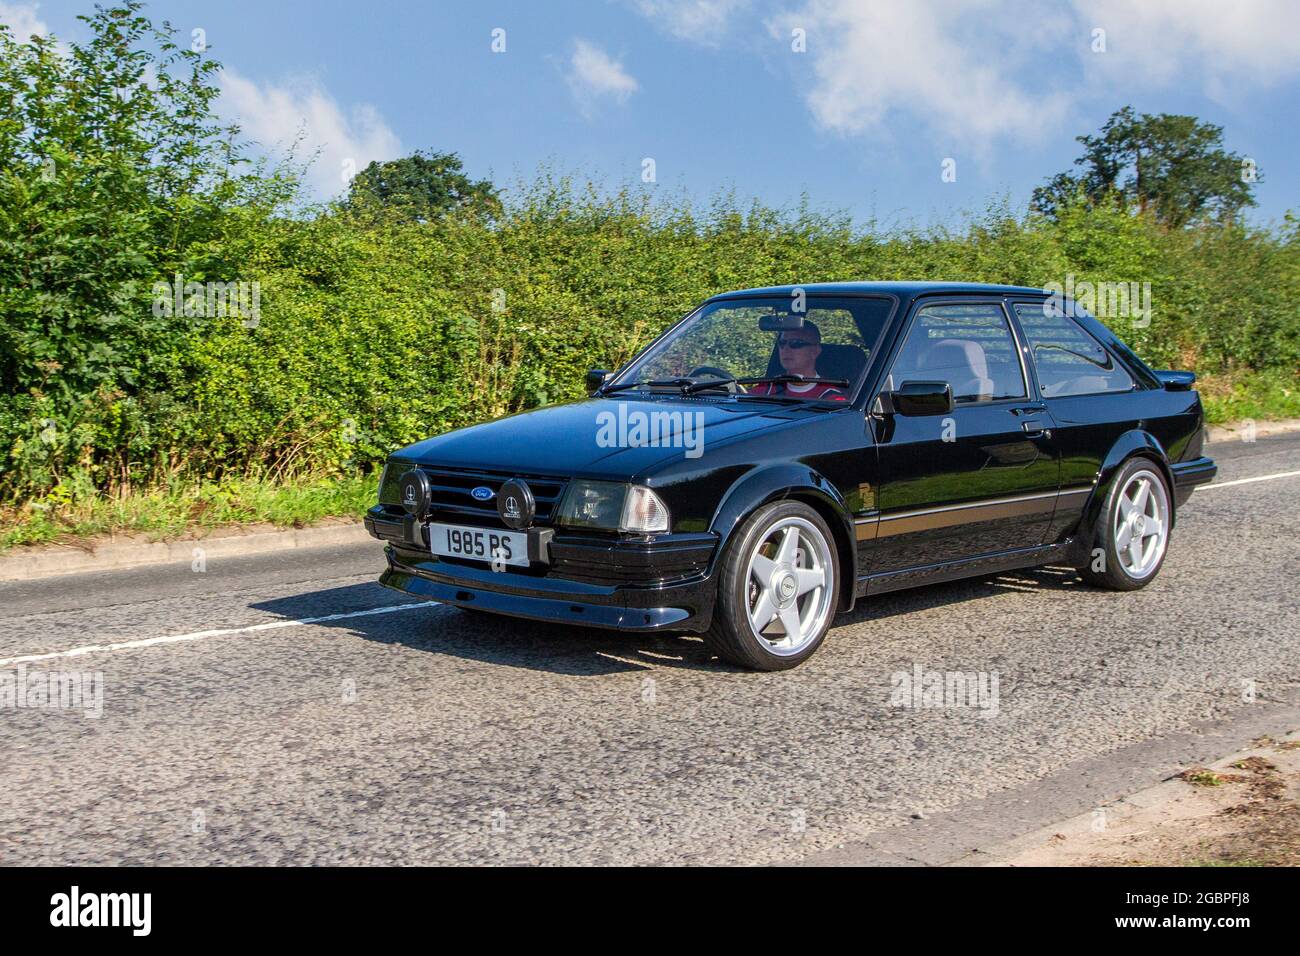 1985 80s black Ford GL RS Turbo 1597cc petrol 2dr sports car en-route to Capesthorne Hall classic July car show, Cheshire, UK Stock Photo